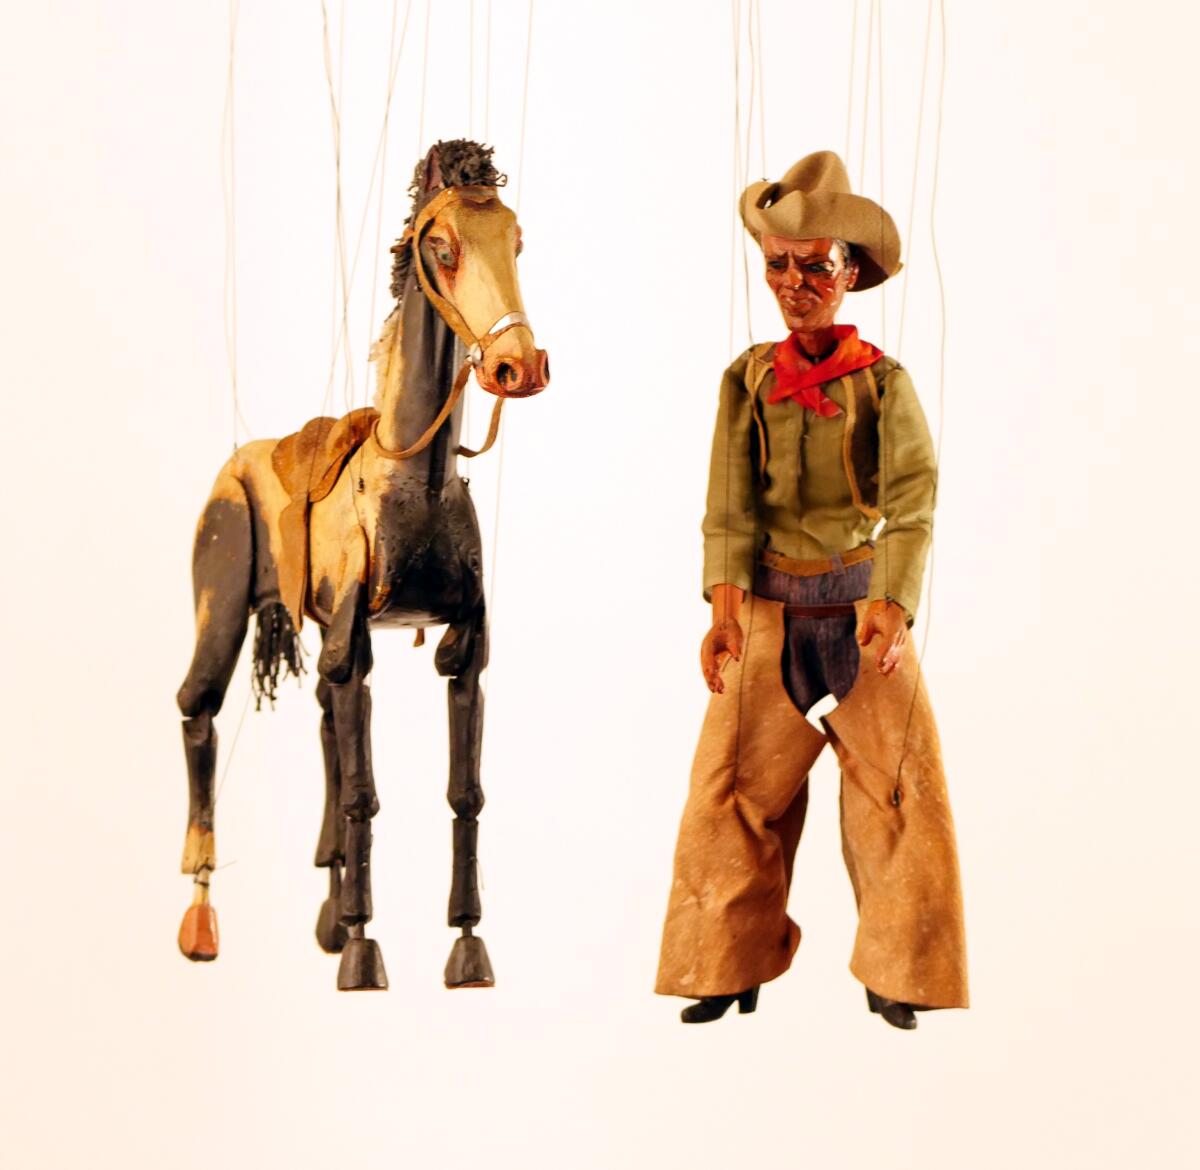 Miniatures of a horse and a cowboy